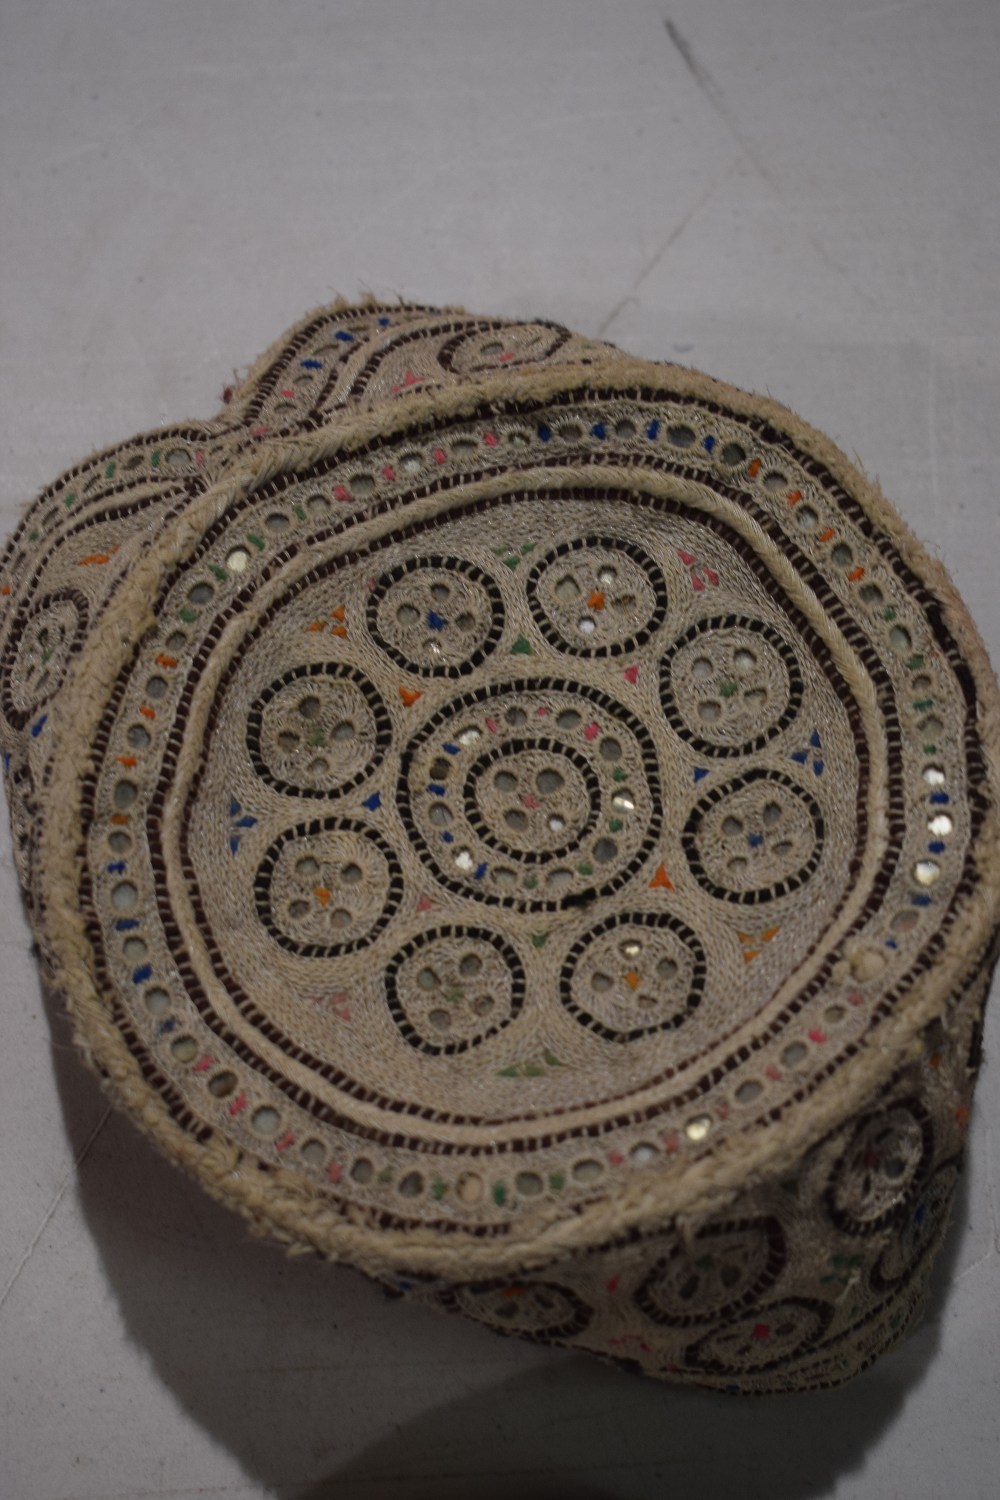 Six Sindhi Baluchi topi (caps), embroidered in coloured silks, metal threads and shisha-work ( - Image 16 of 30